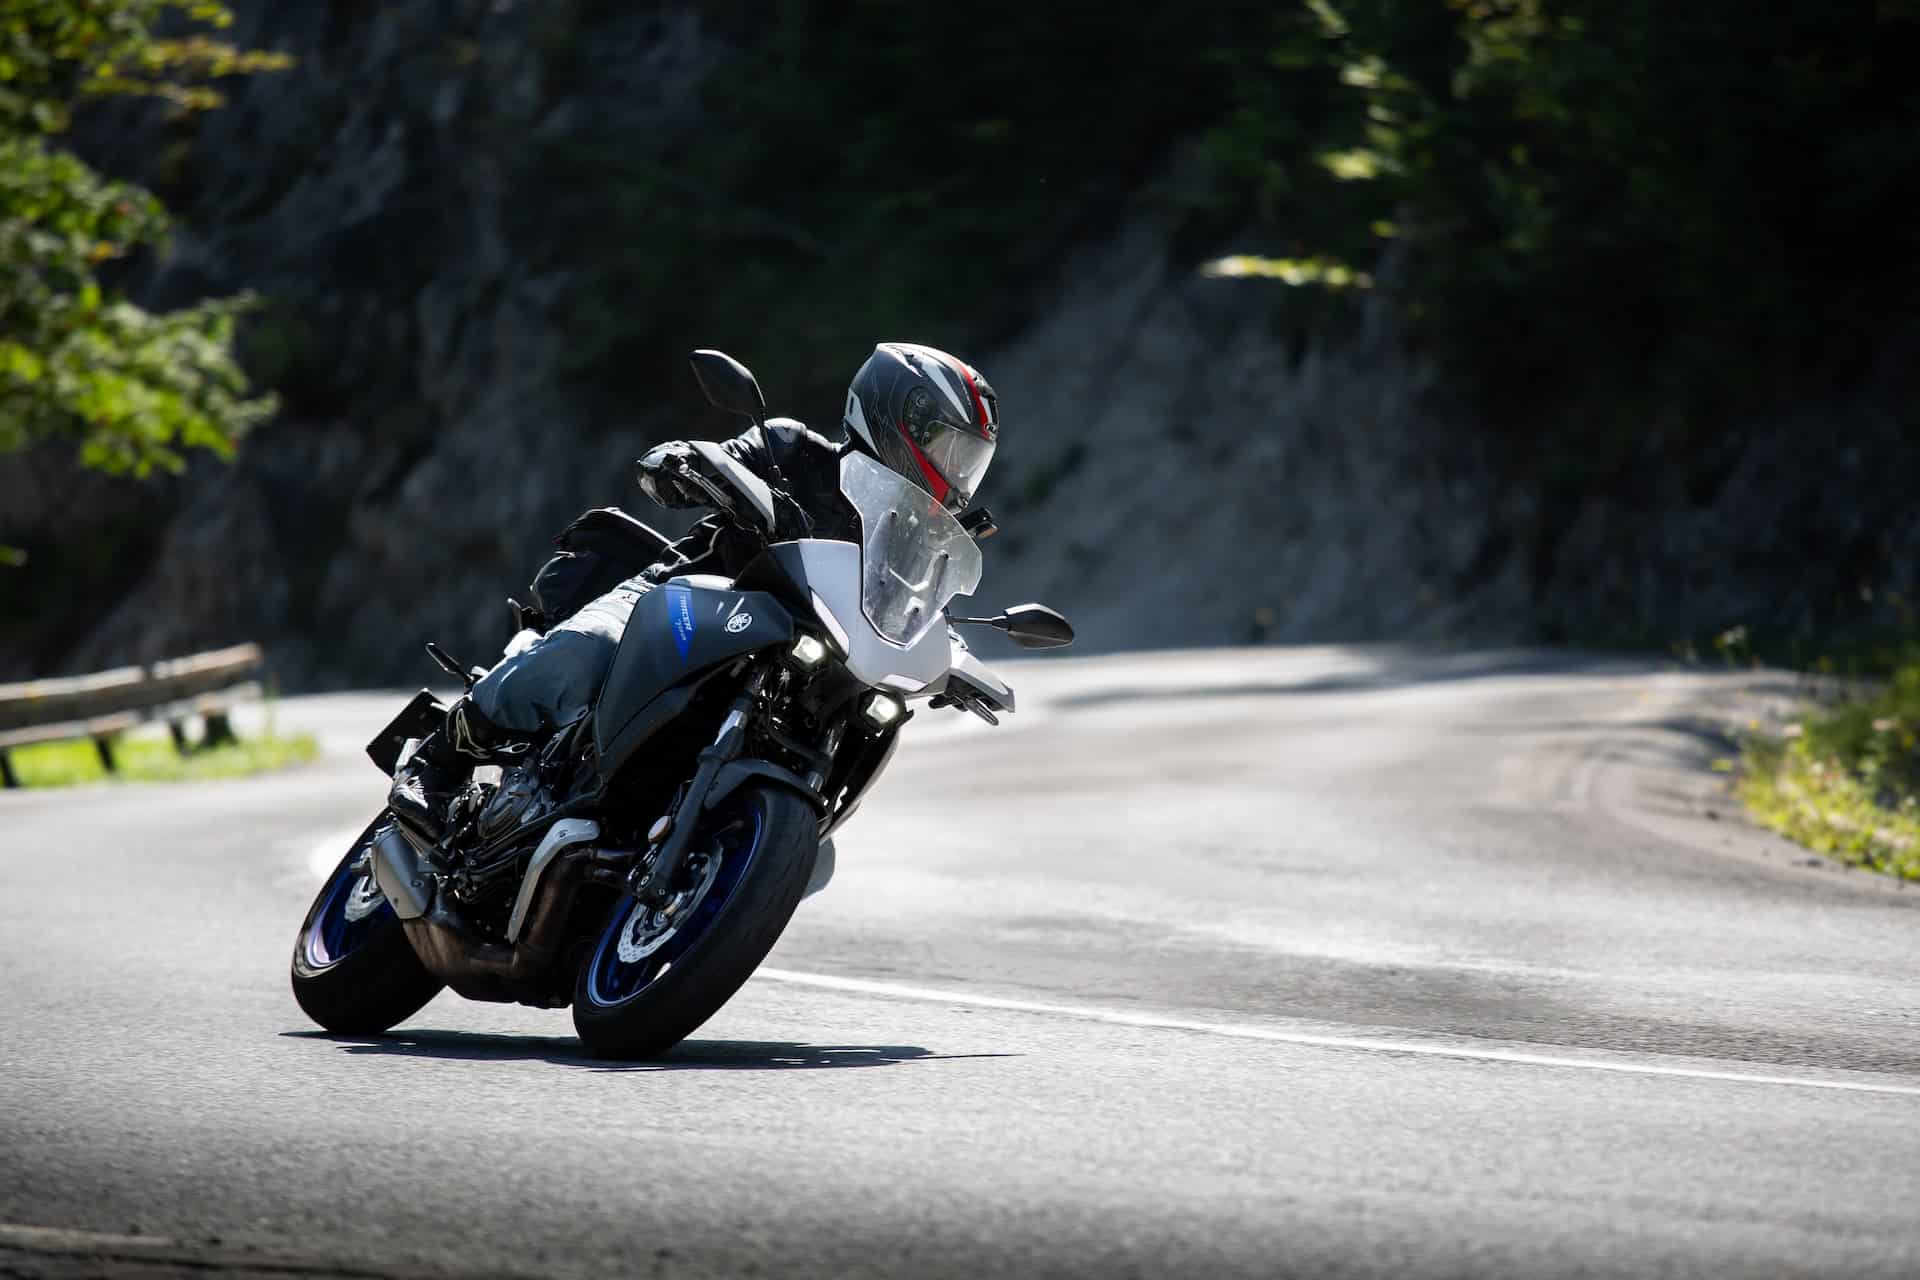 Motorcycle clothing for very warm days – see our suggestions